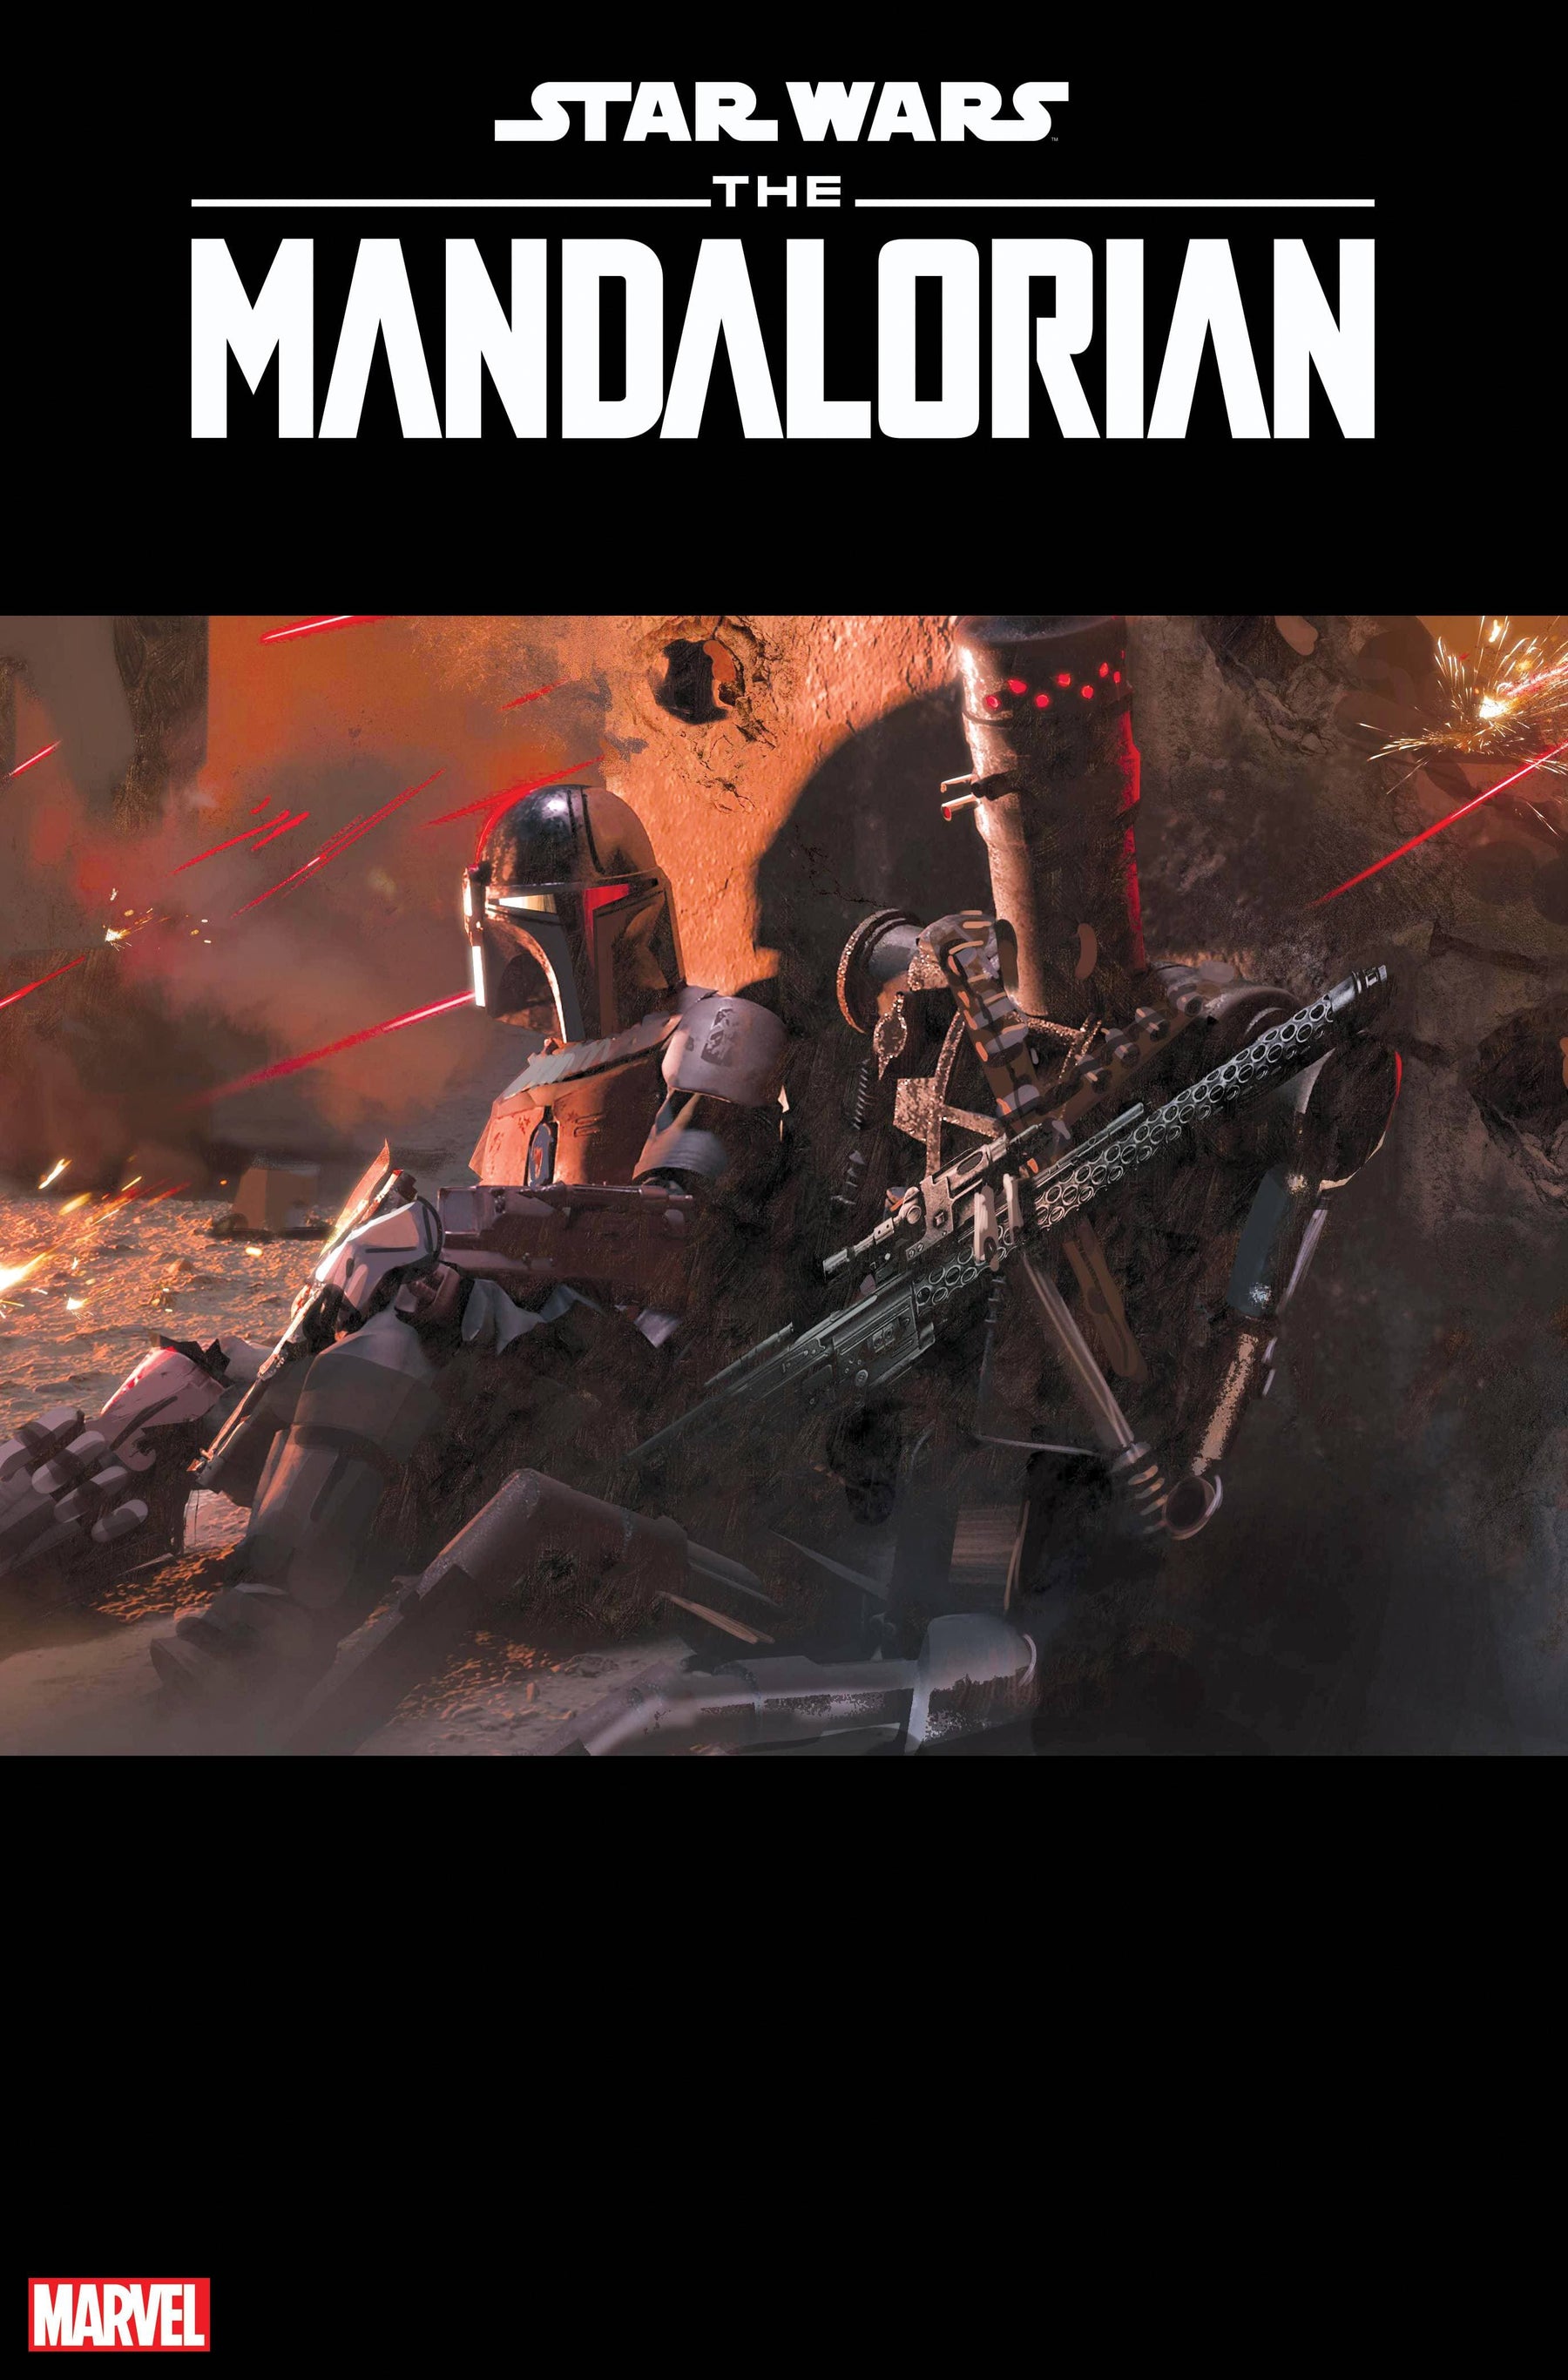 STAR WARS: THE MANDALORIAN #1 1:10 CONCEPT ART VARIANT SIGNED BY RODNEY BARNES